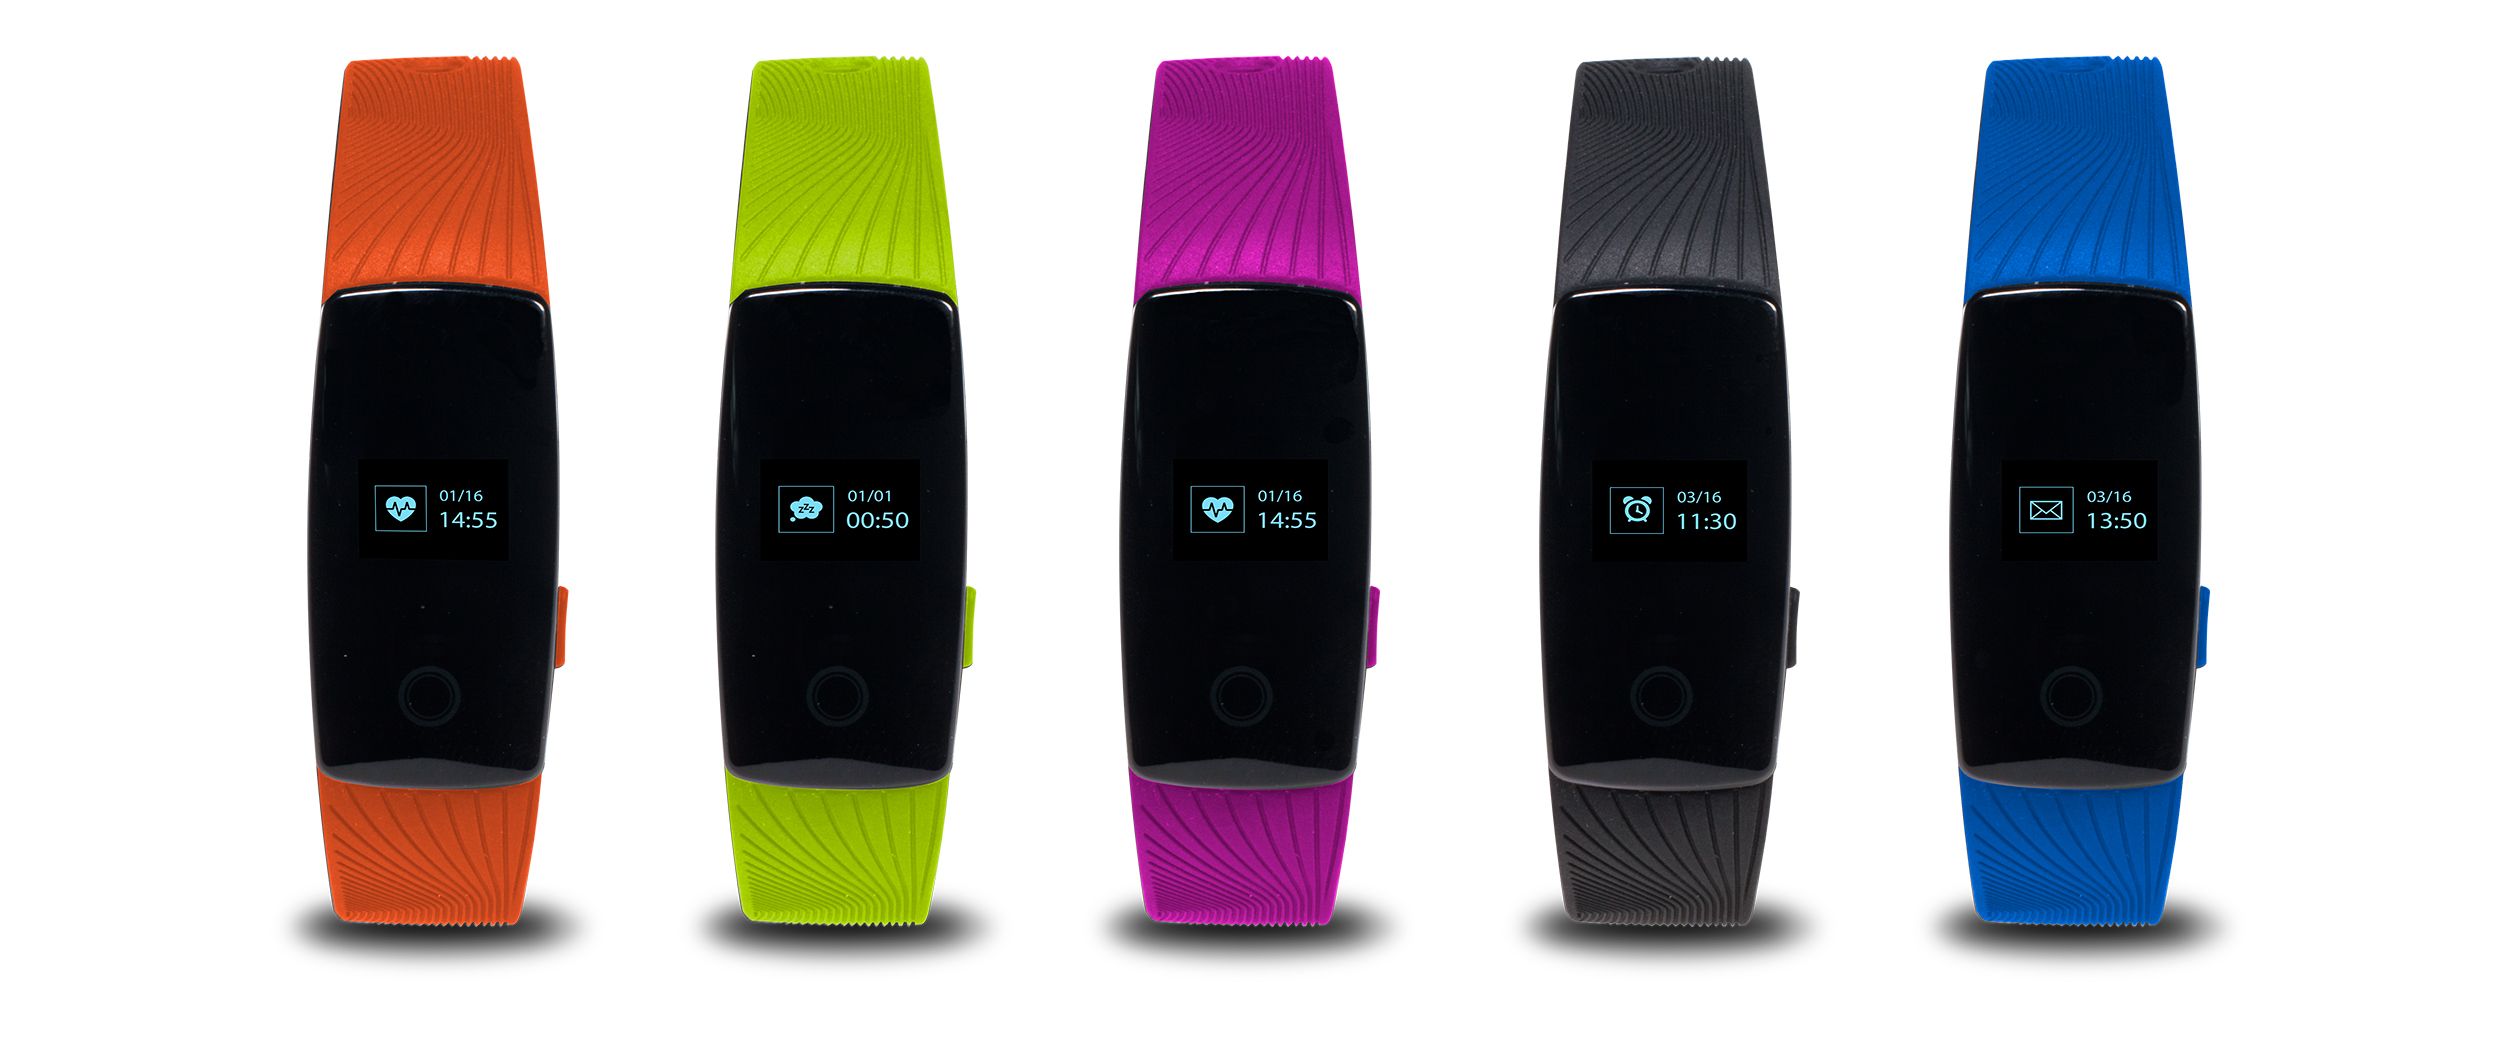 #PopuReview | Smart Fitband E-12: inteligente y made in Argentina